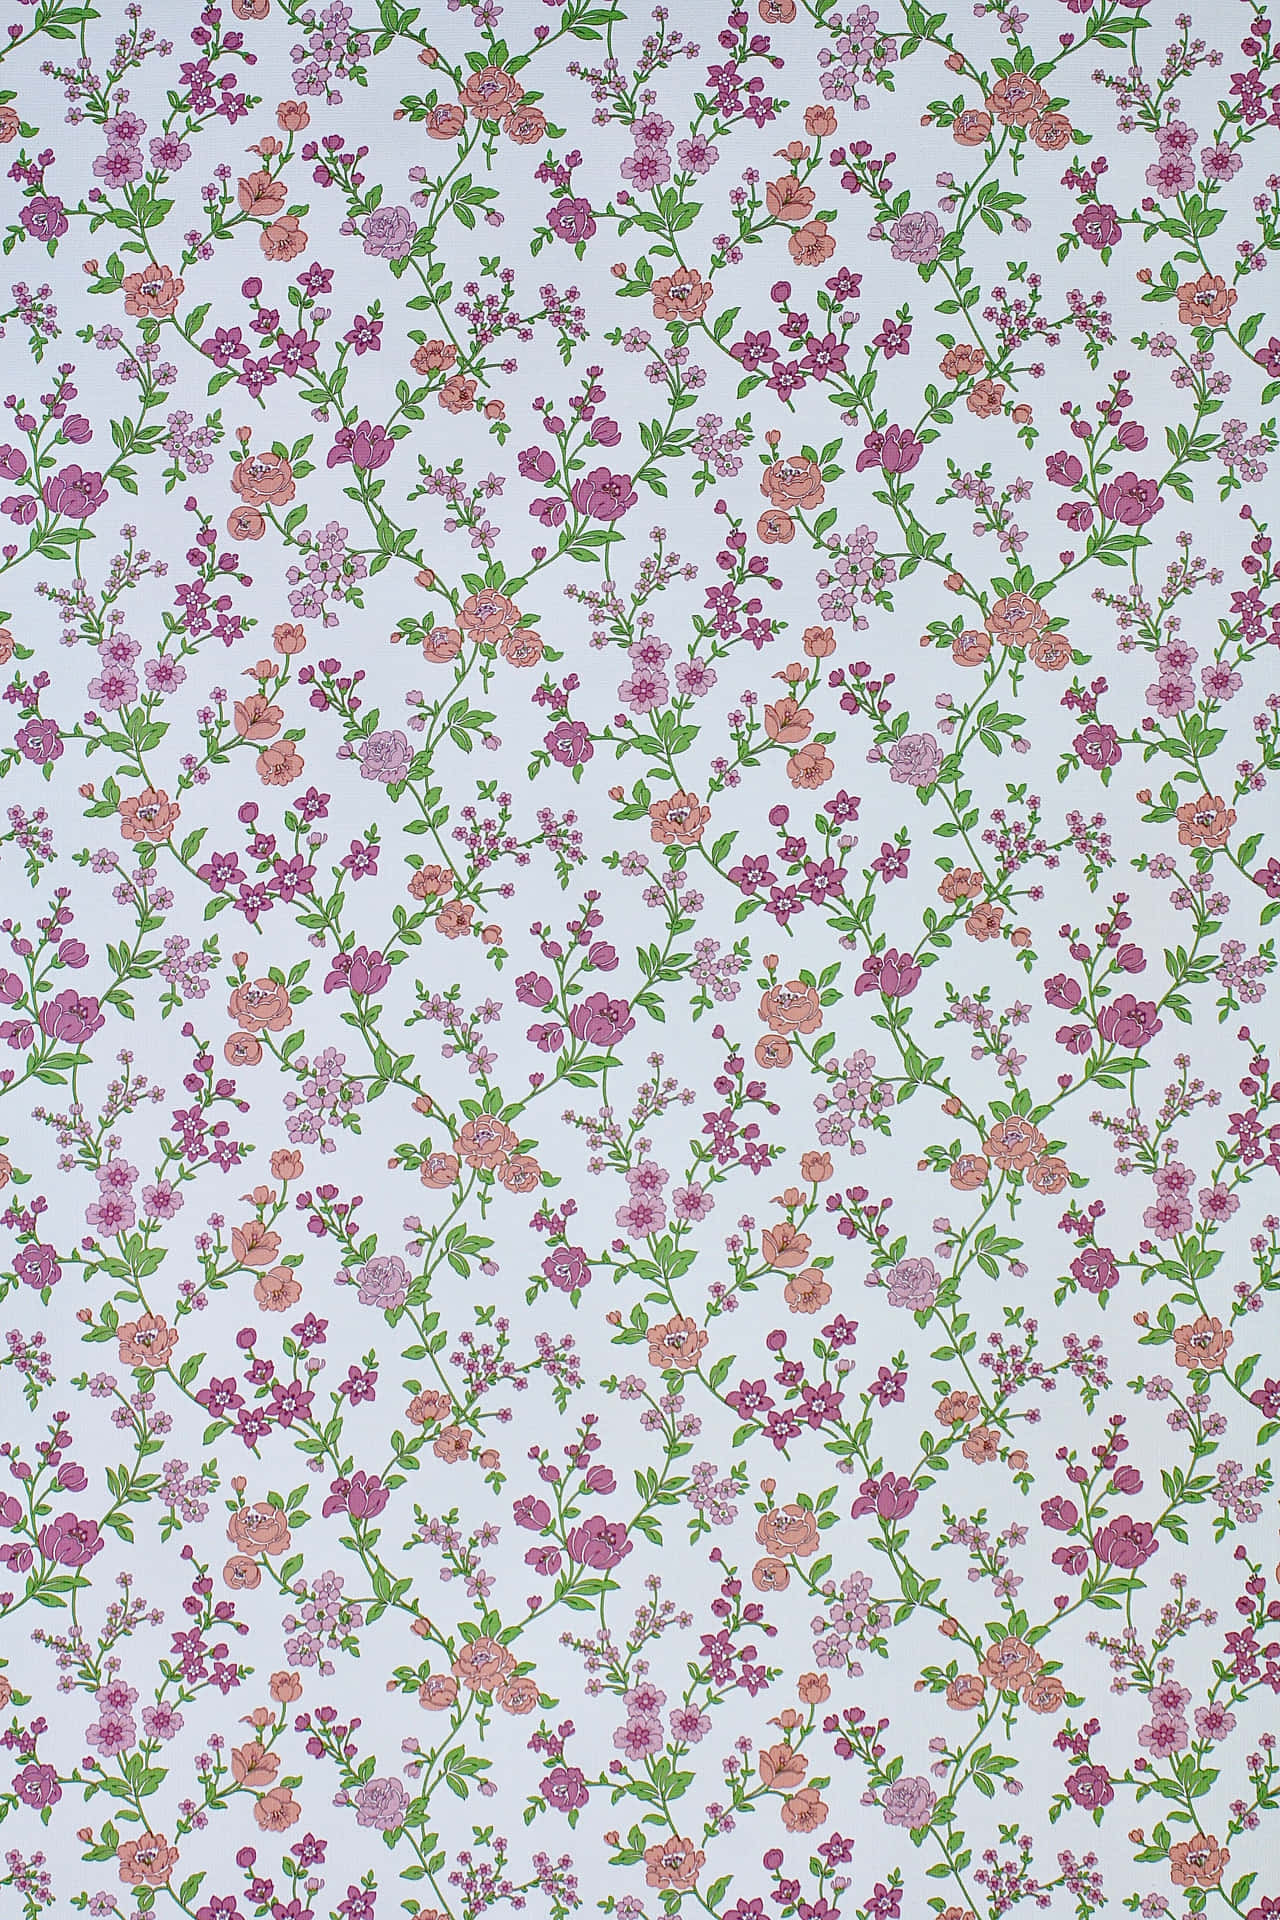 A lush and beautiful vintage floral background